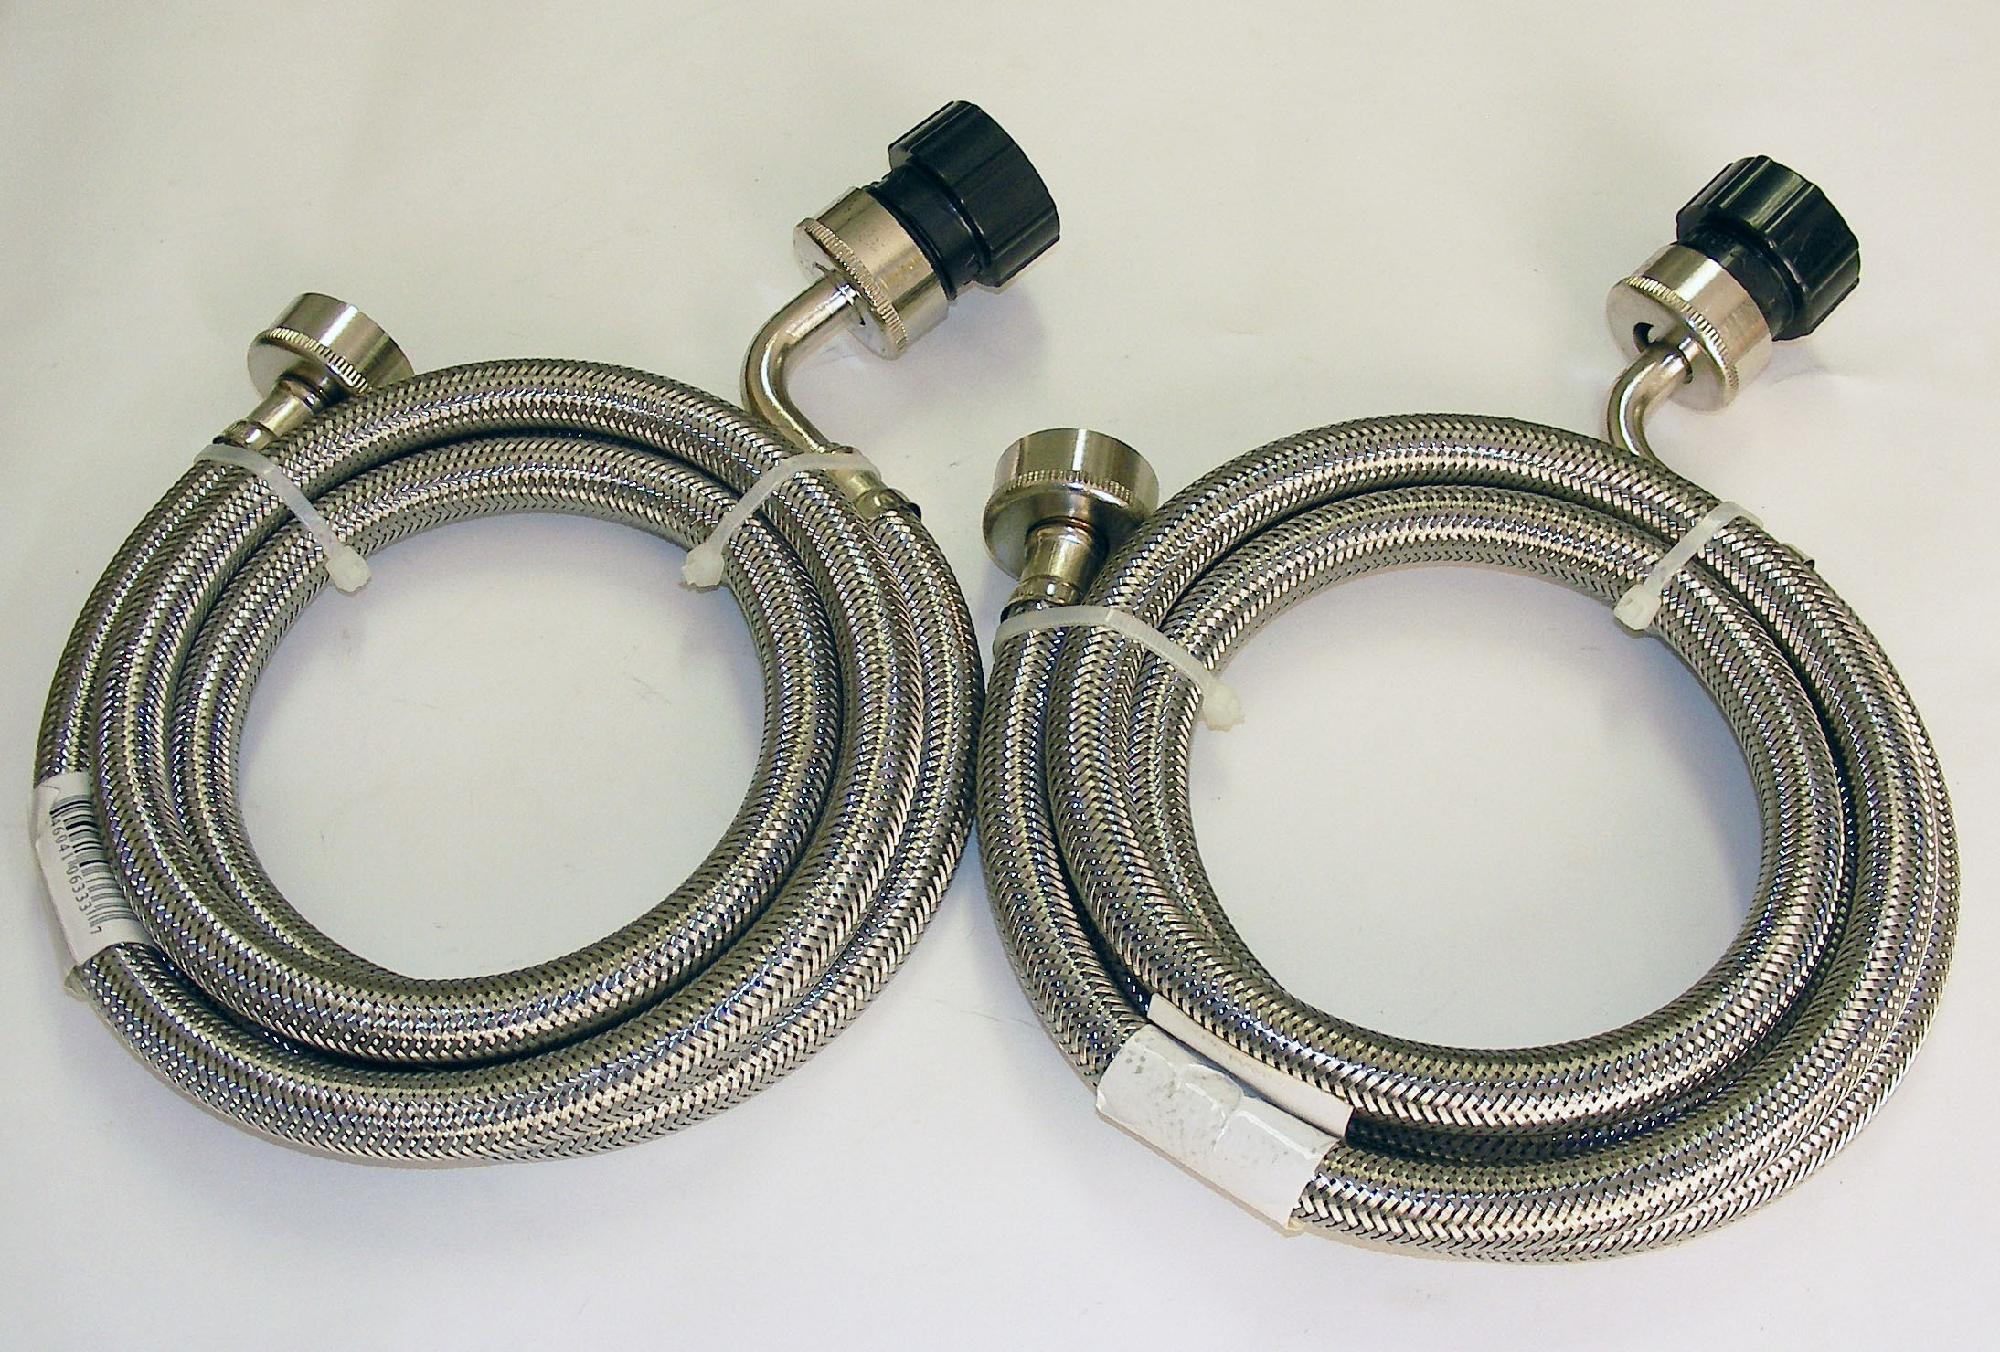 Equator Advanced Appliances Stainless Steel Hoses